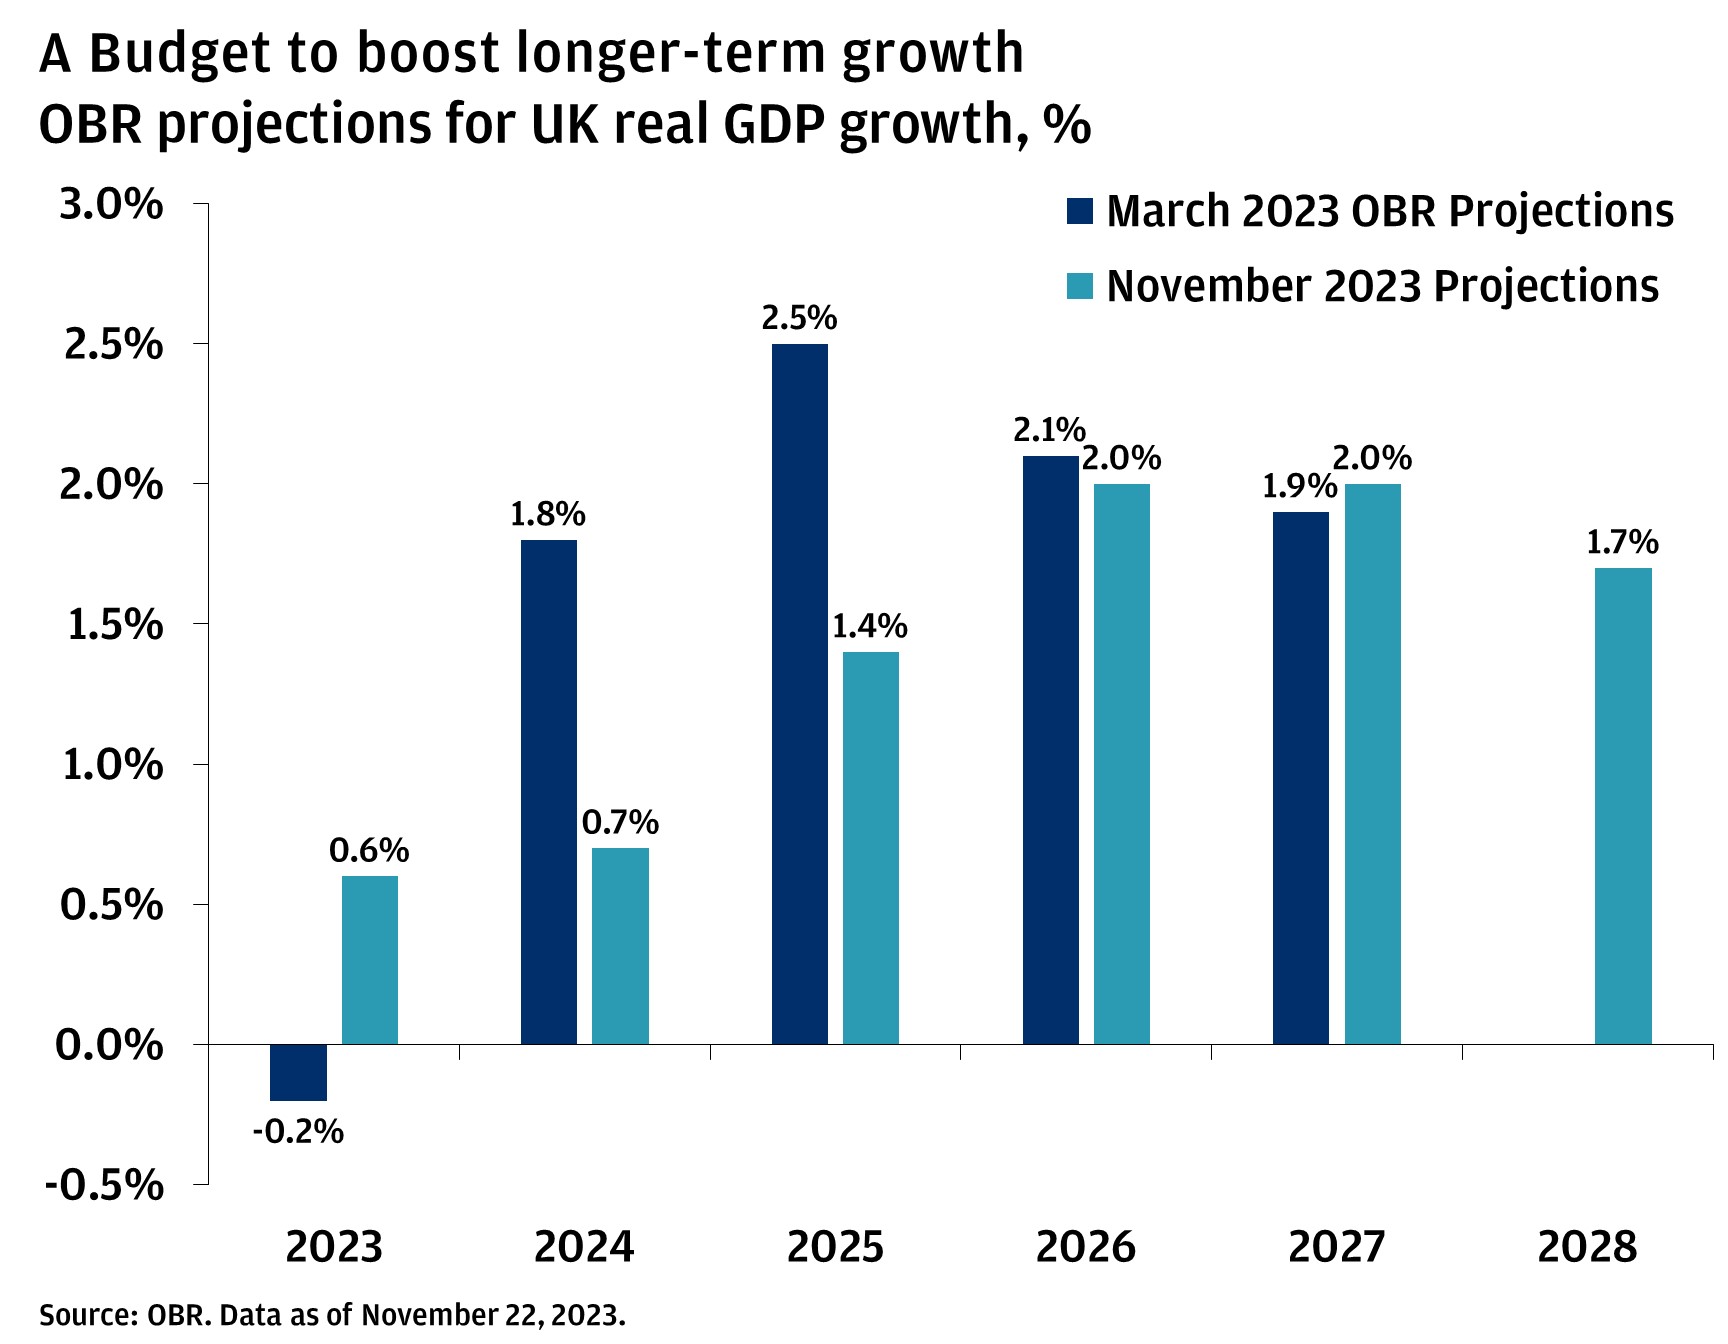 This bar chart shows that OBR projections for real GDP growth from 2023 to 2028 from both the March 2023 Budget and November 2023 Budget statements. 